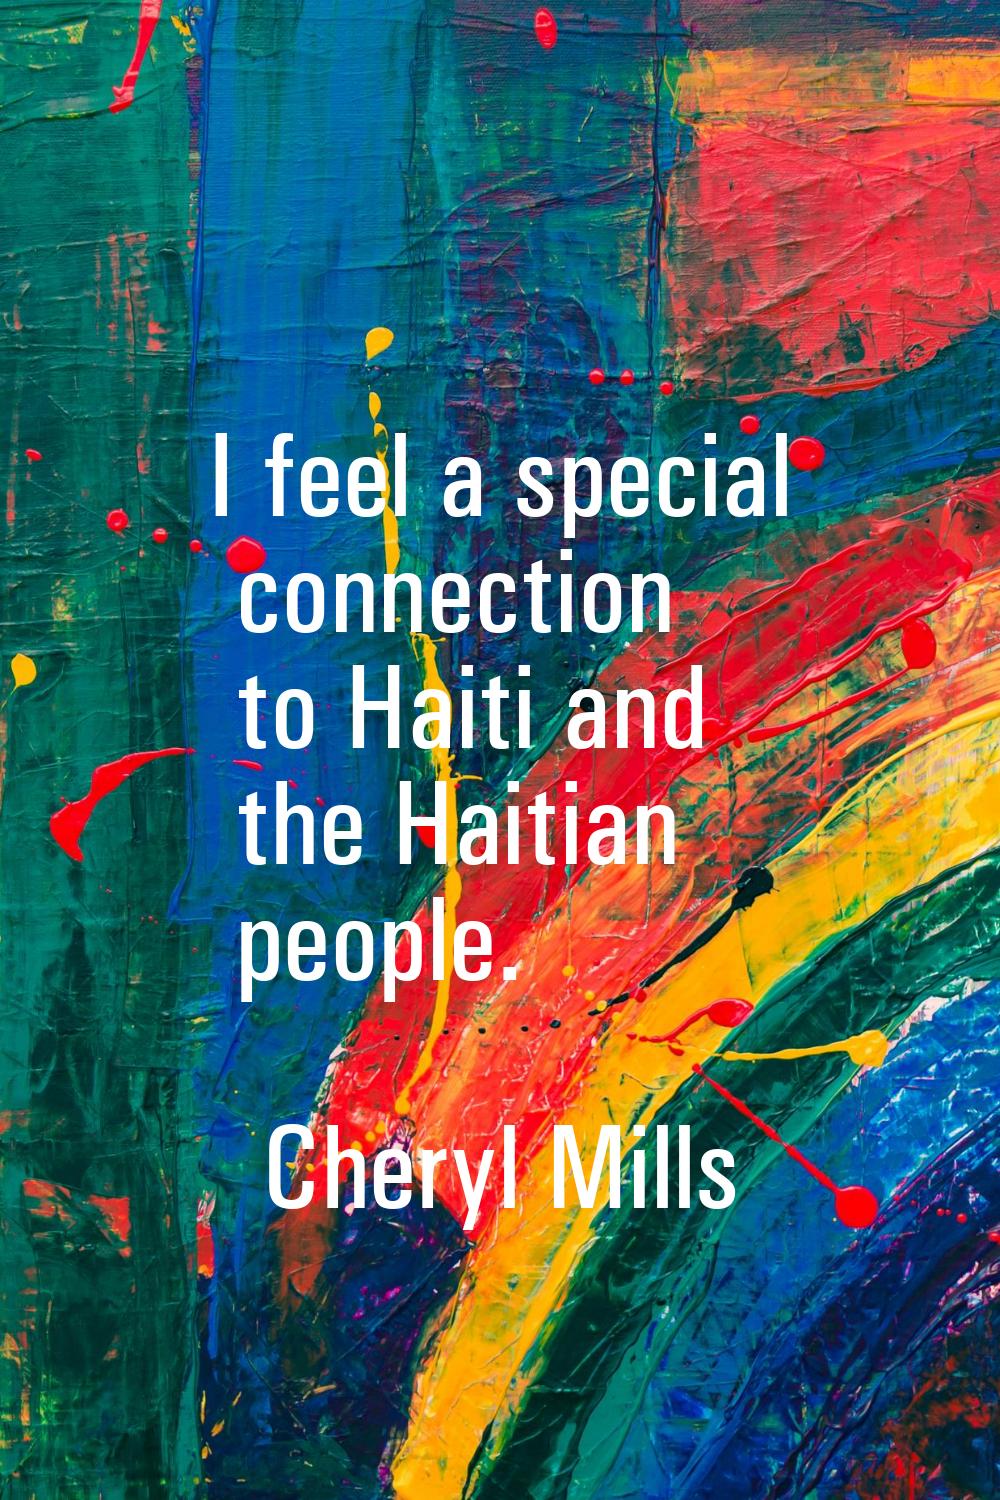 I feel a special connection to Haiti and the Haitian people.